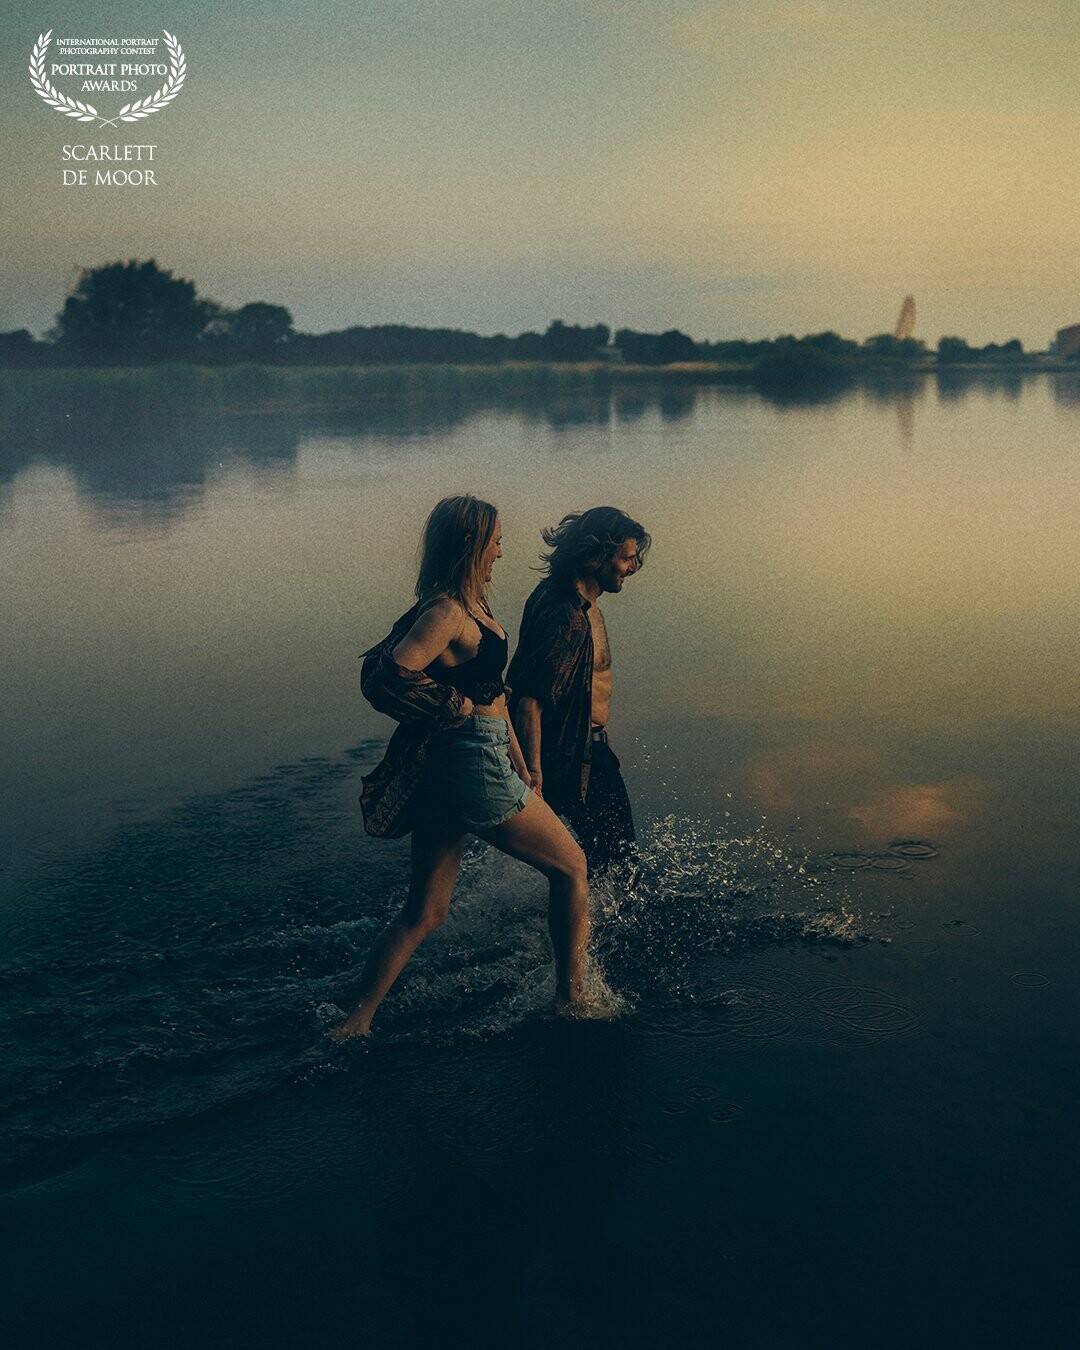 As a cinematic photographer, I wanted to create a scene where lovers would run away together. I love how this turned out. With these beautiful people, the blue hour and the haziness above the water.